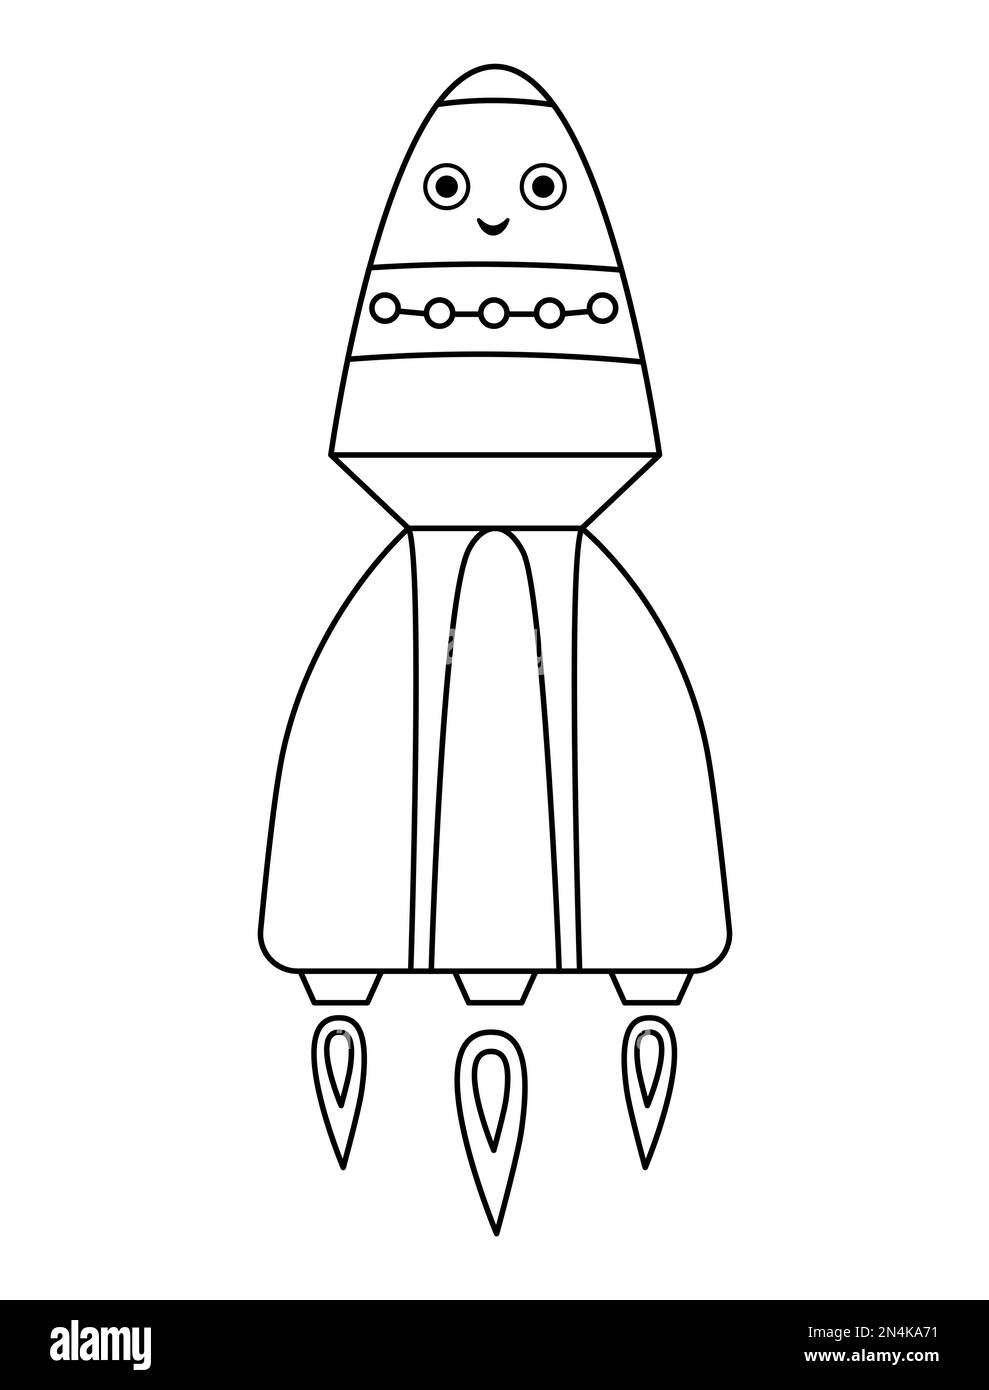 Vector black and white rocket illustration for children. Outline smiling spaceship icon isolated on white background. Space exploration coloring page Stock Vector